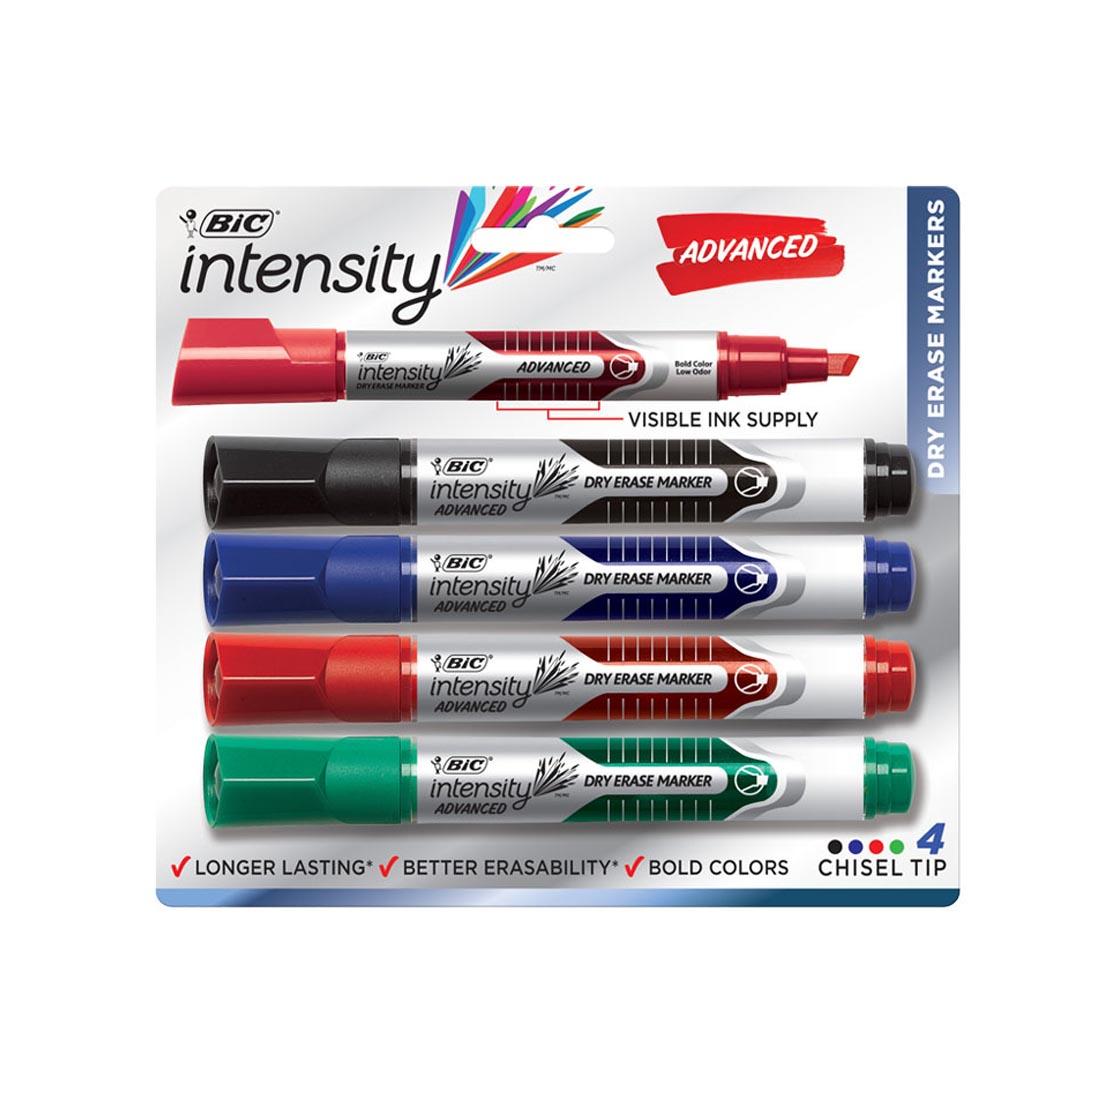 Bic Intensity Advanced Dry Erase Chisel Tip Markers in Black, Blue, Red and Green